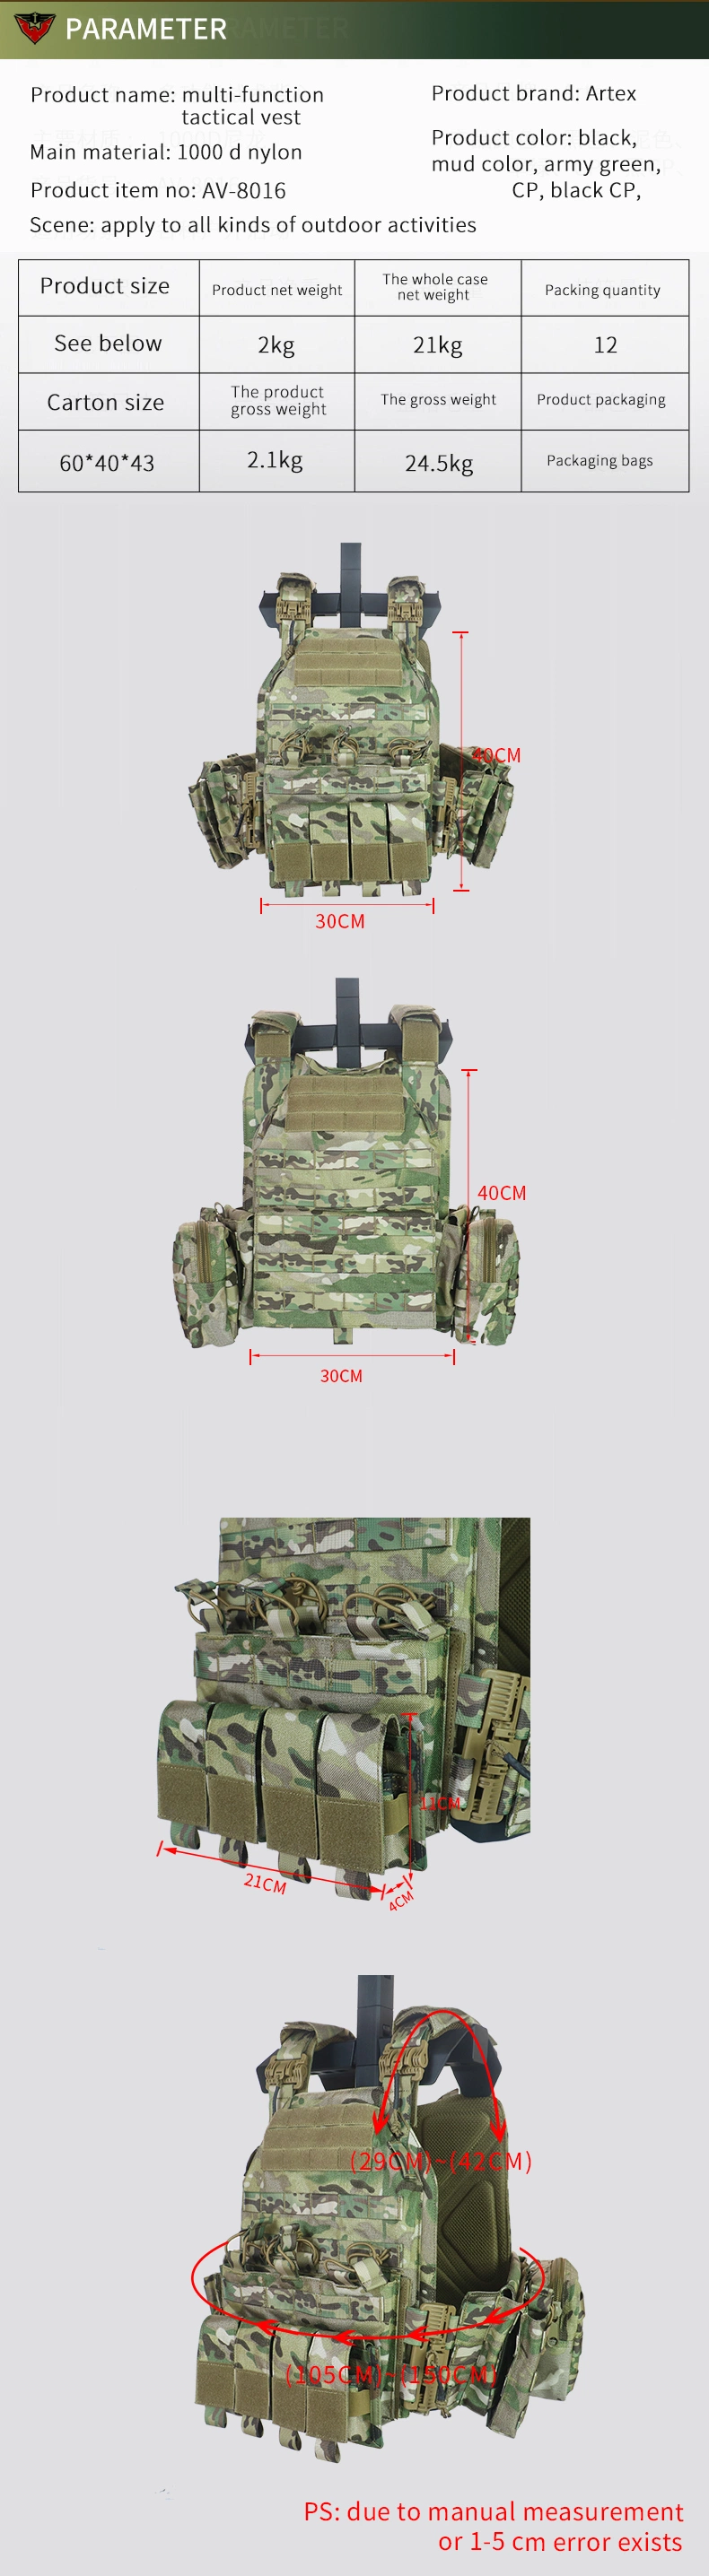 Outdoor Bulletproof Vest Military Camouflage Multi-Functional Training Military Combat Tactical Vest